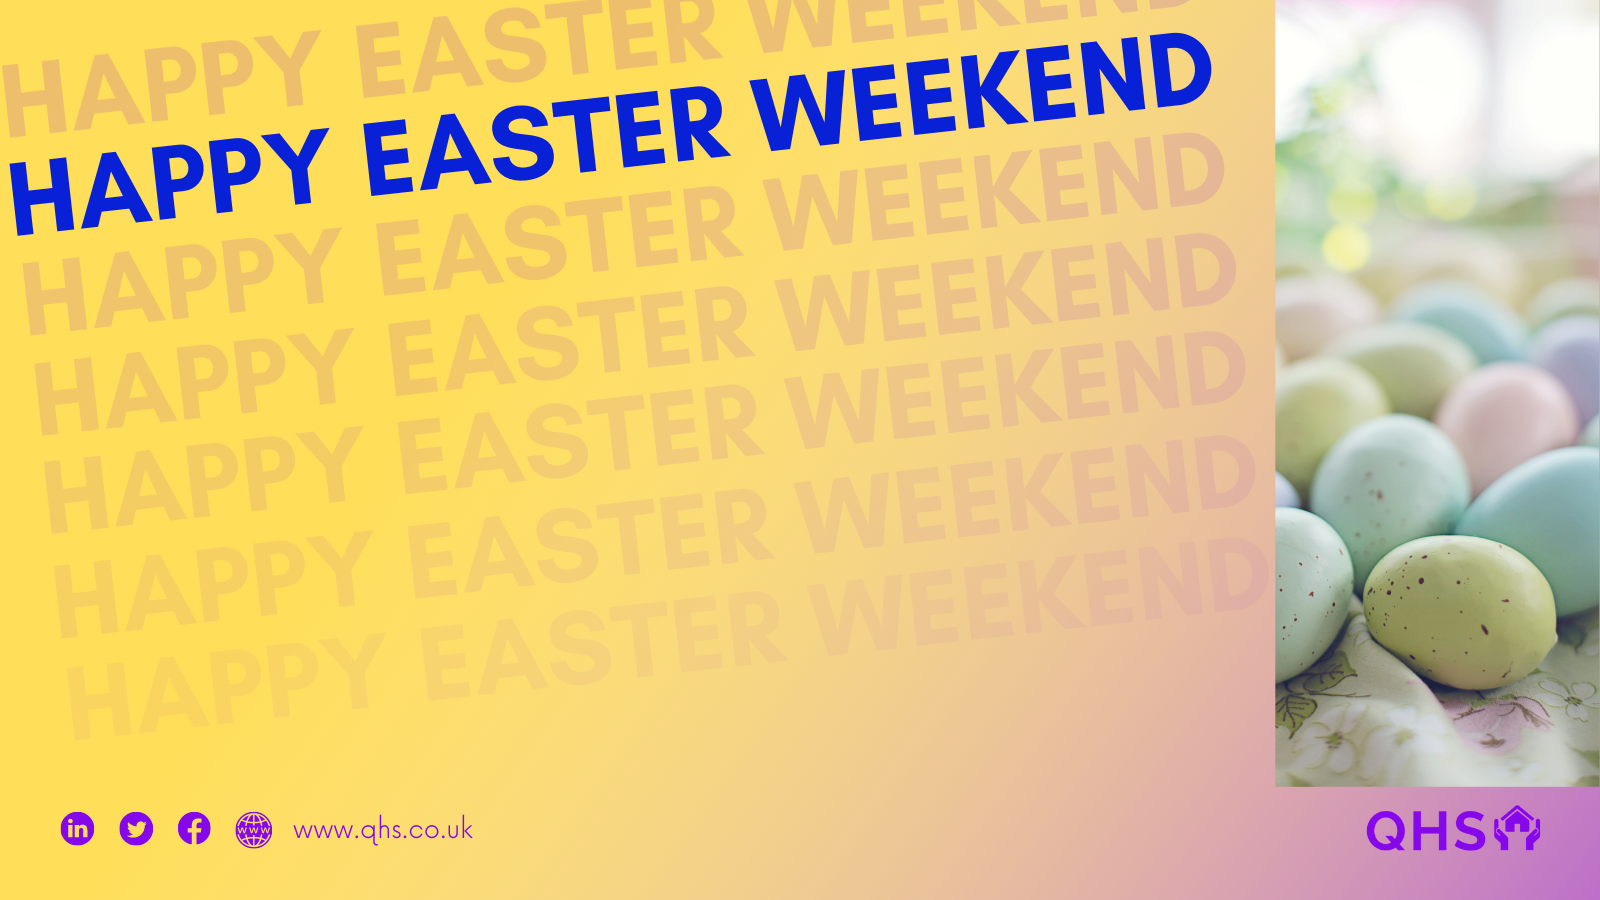 QHS Wishes You A Happy Easter Bank Holiday Weekend - News ¦¦ QHS